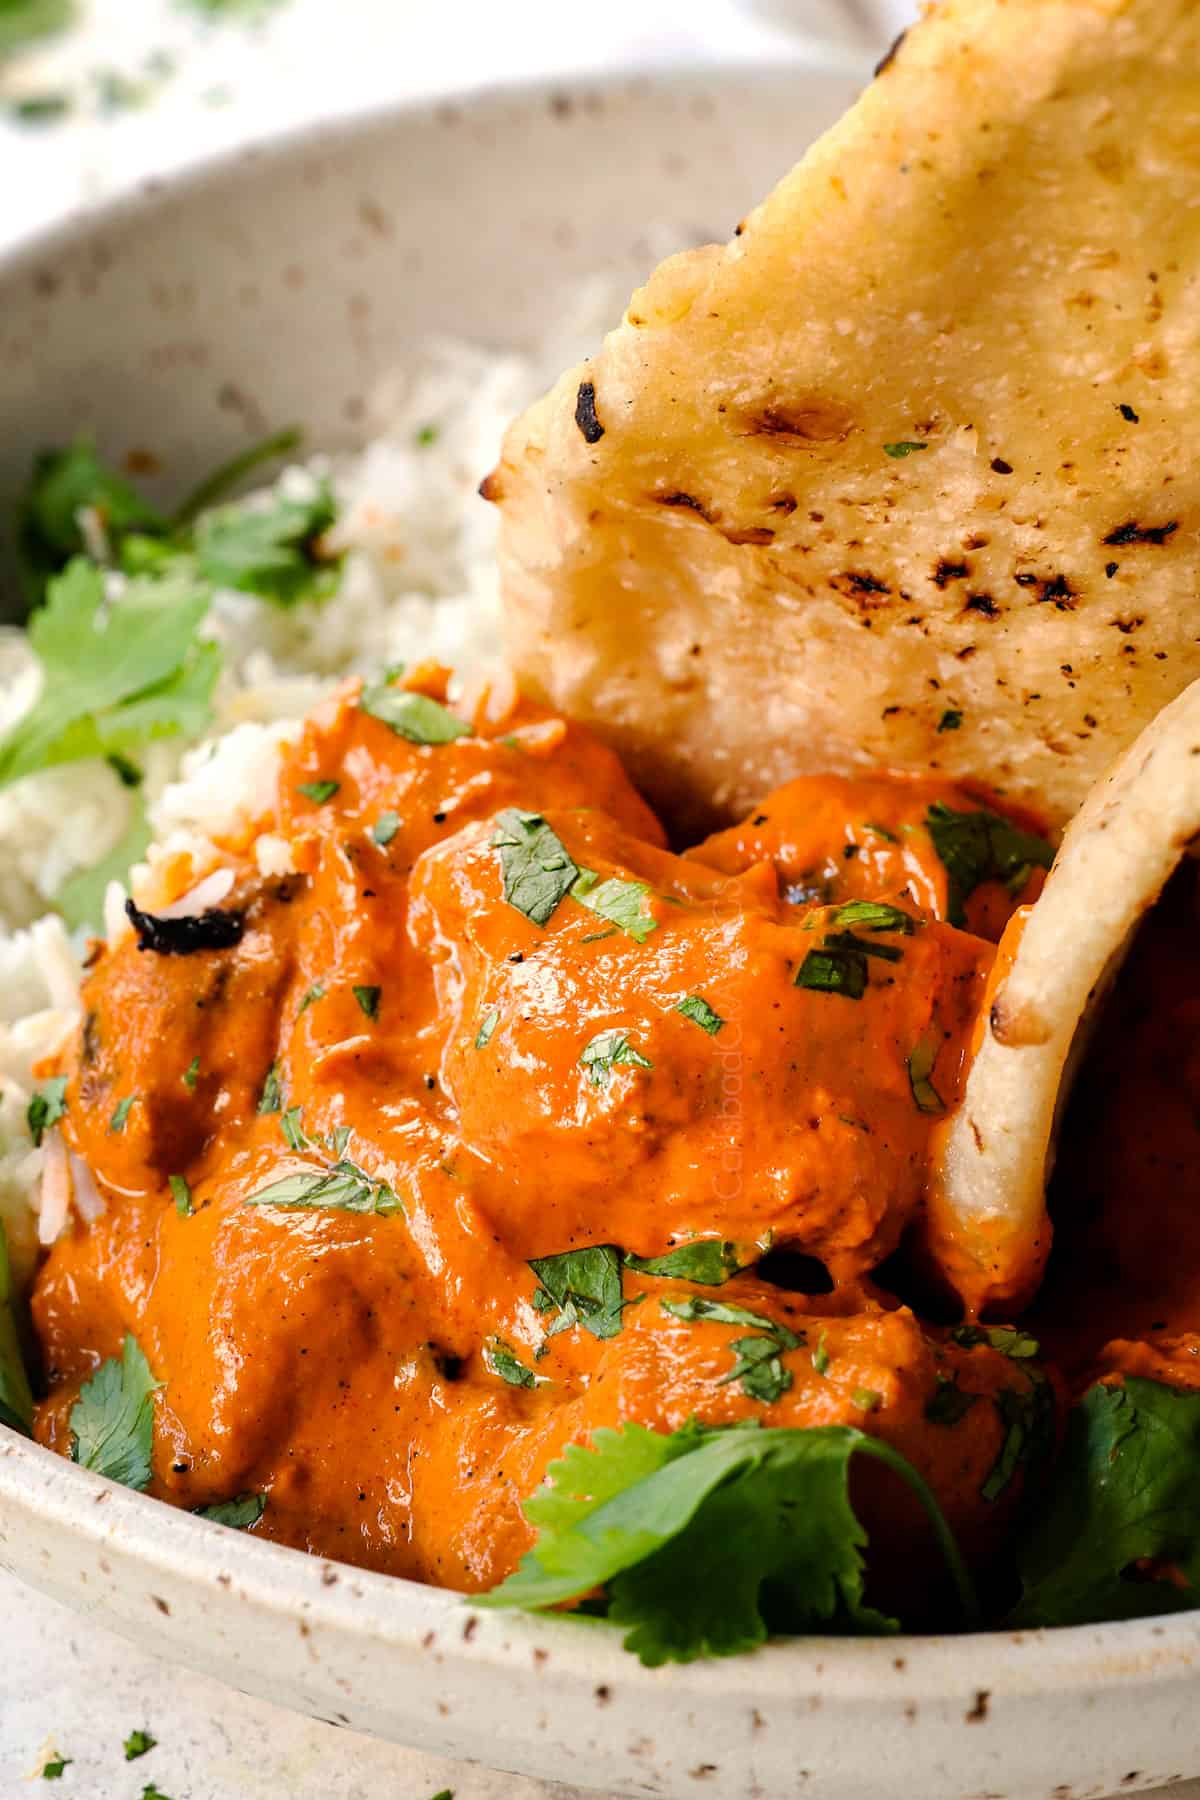 showing how to serve chicken tikka masala by scooping up the chicken and sauce with naan bread